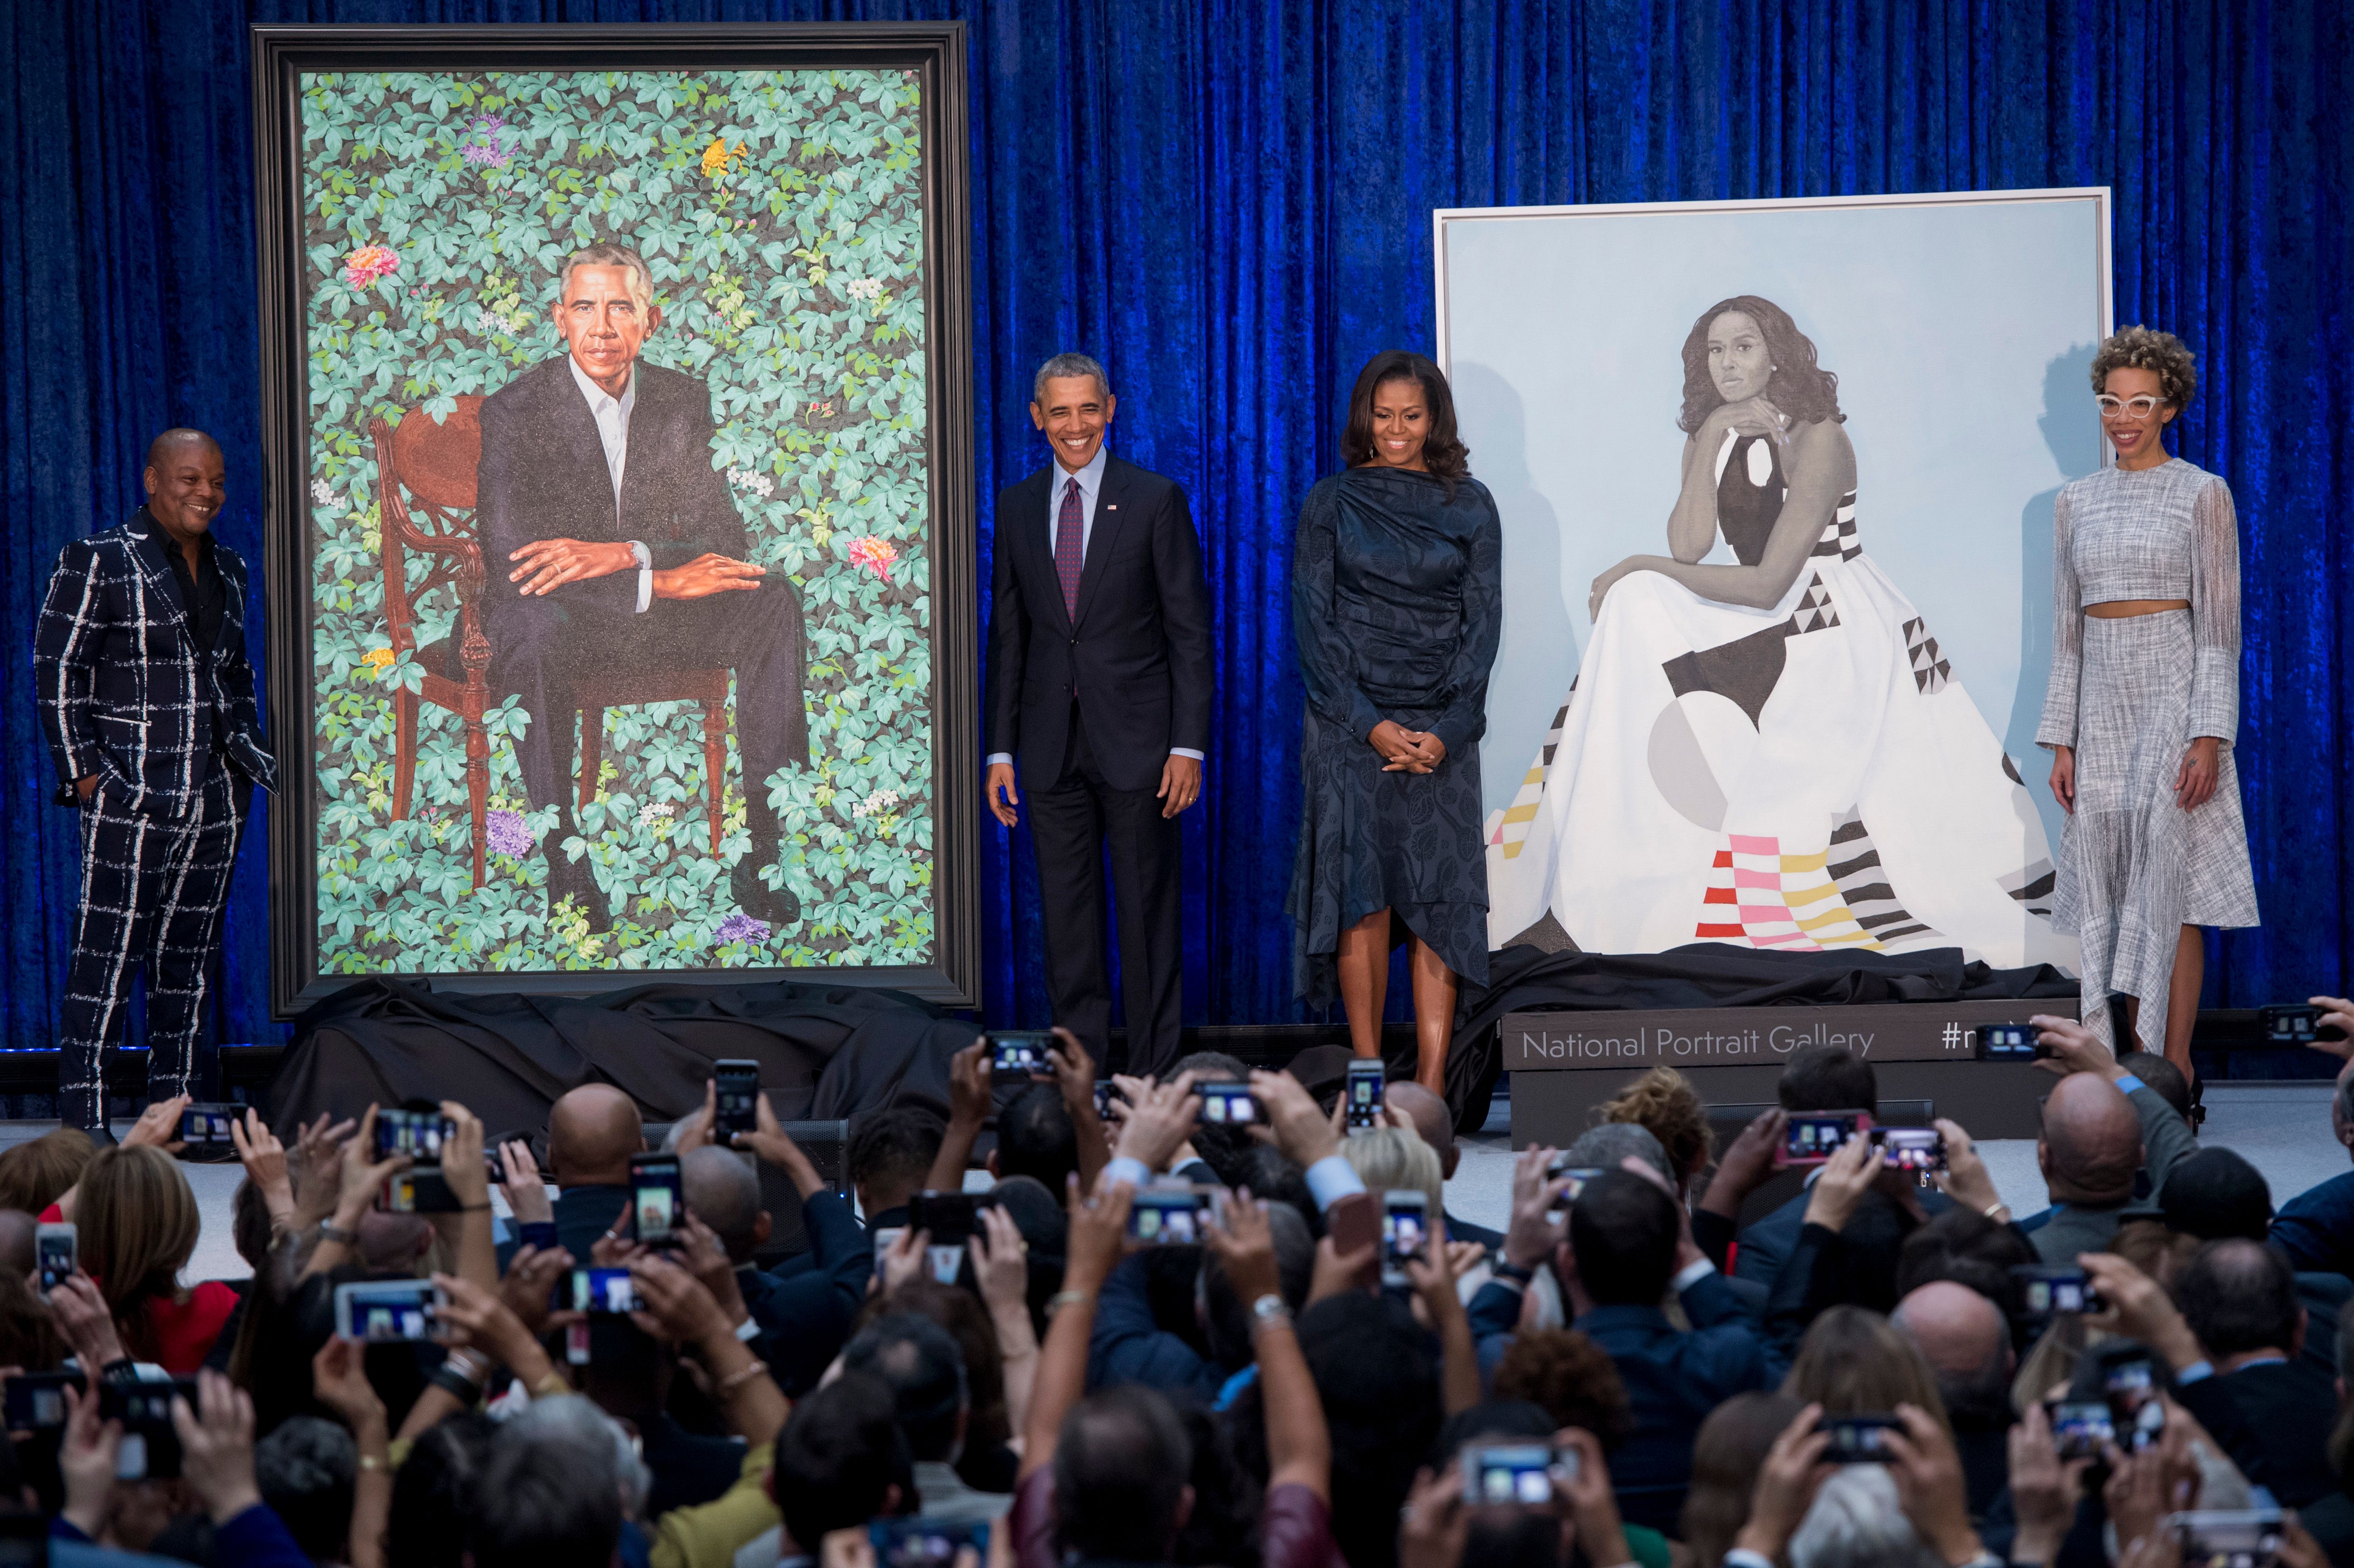 Former US President Barack Obama and First Lady Michelle Obama stand before their portraits and respective artists, Kehinde Wiley (L) and Amy Sherald (R), after an unveiling at the Smithsonian's National Portrait Gallery in Washington, DC, February 12, 2018. GETTY IMAGES / AFP PHOTO / SAUL LOEB